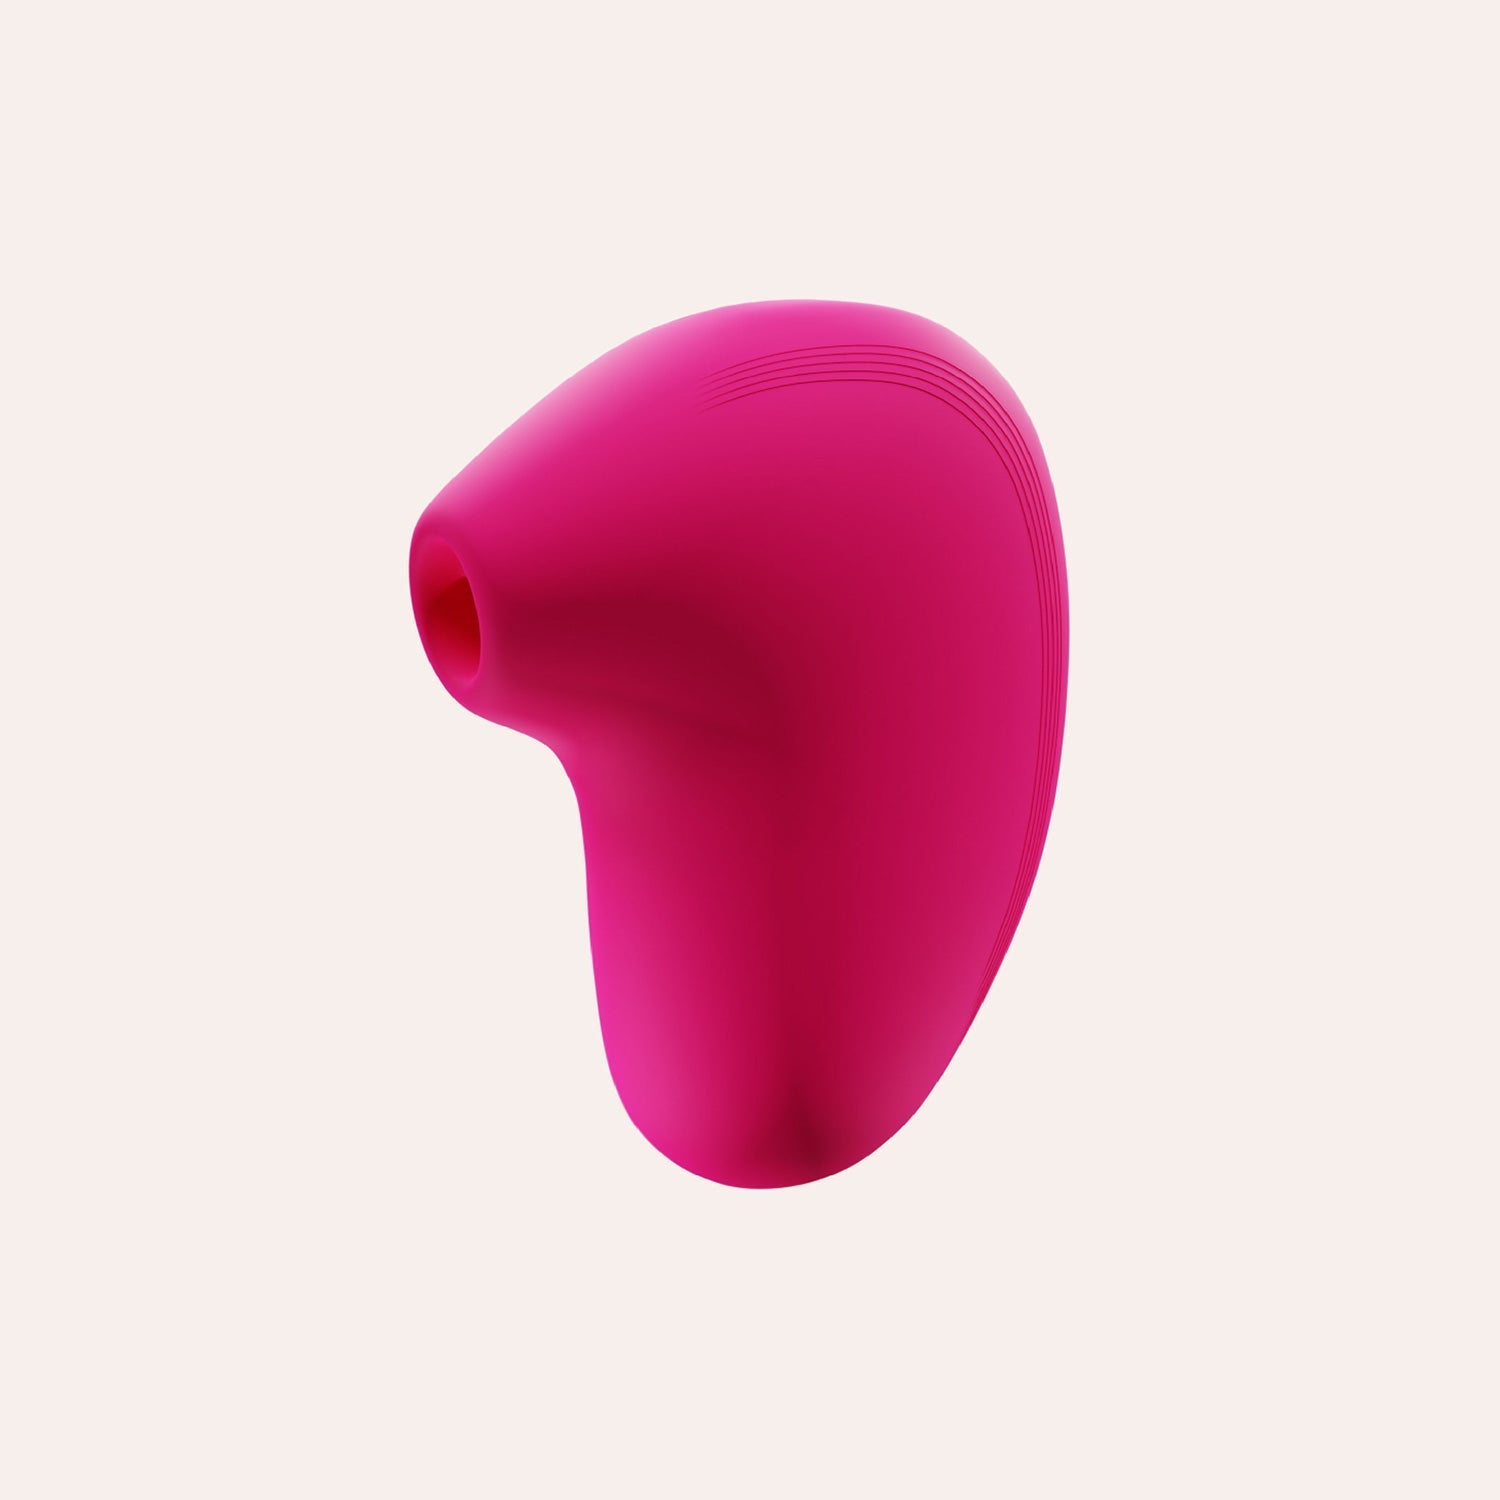 pink colored pocket-sized lit mini personal massager